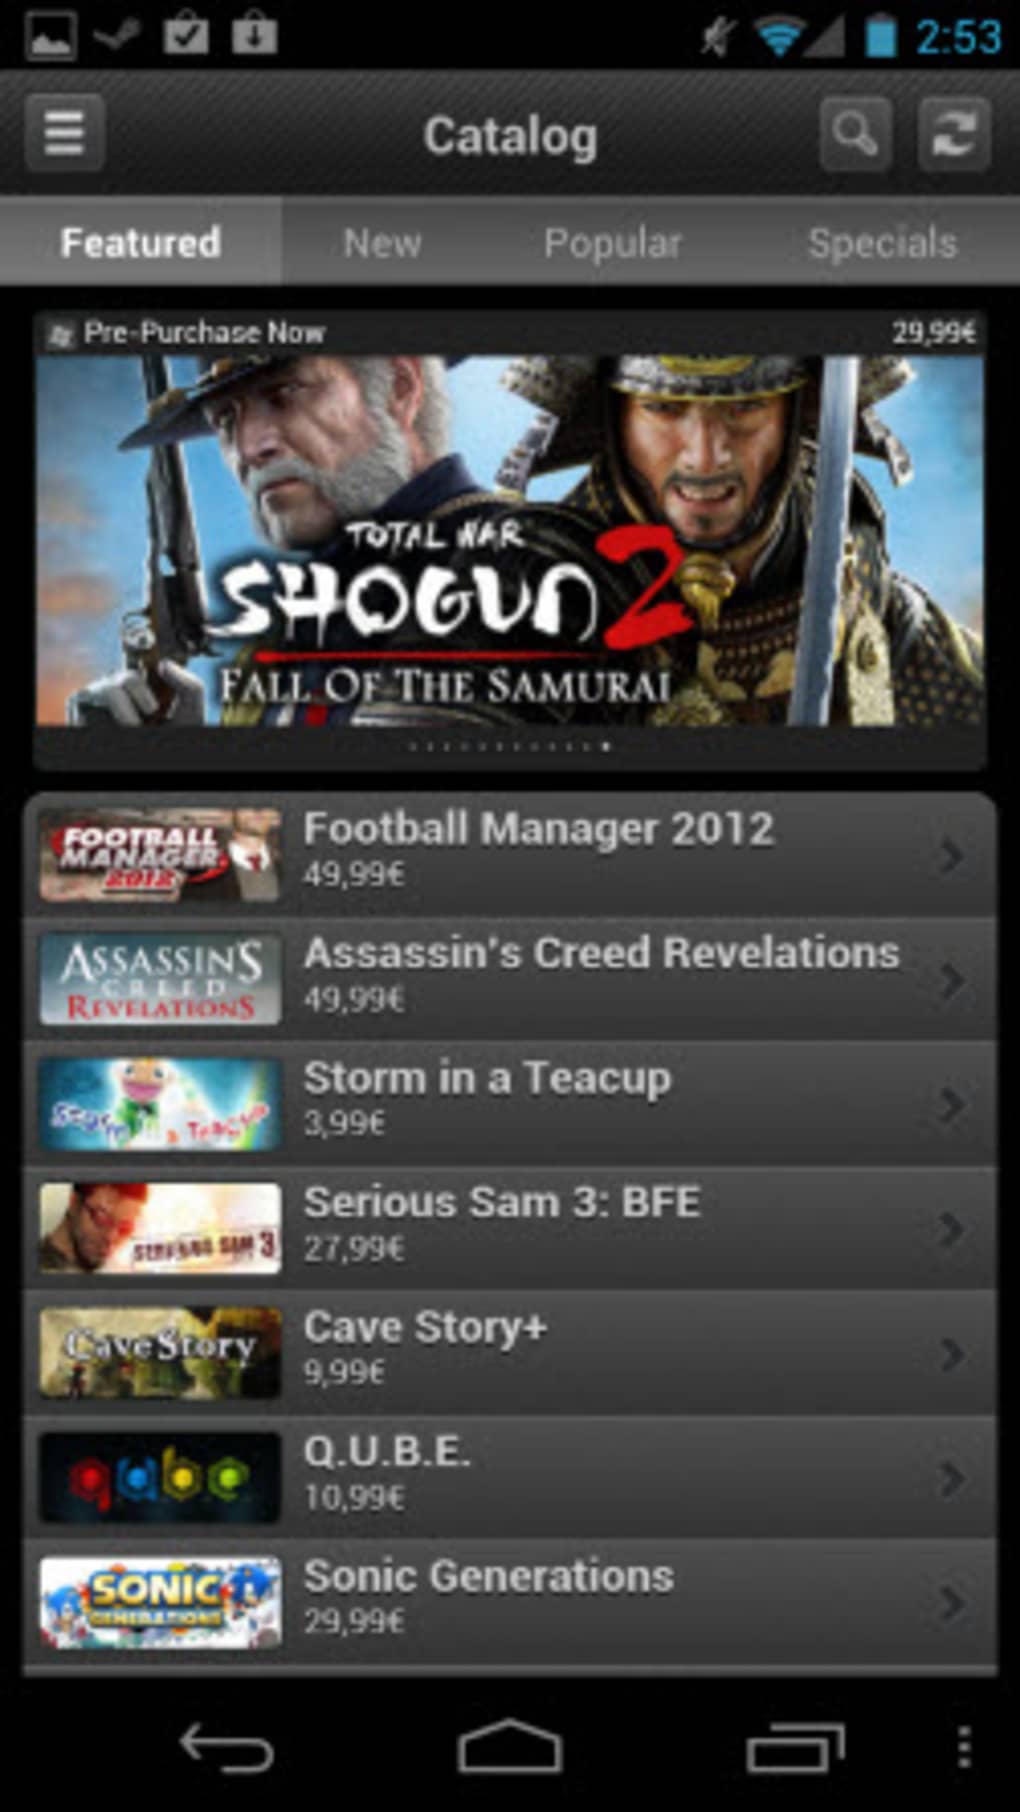 Steam Status APK for Android Download